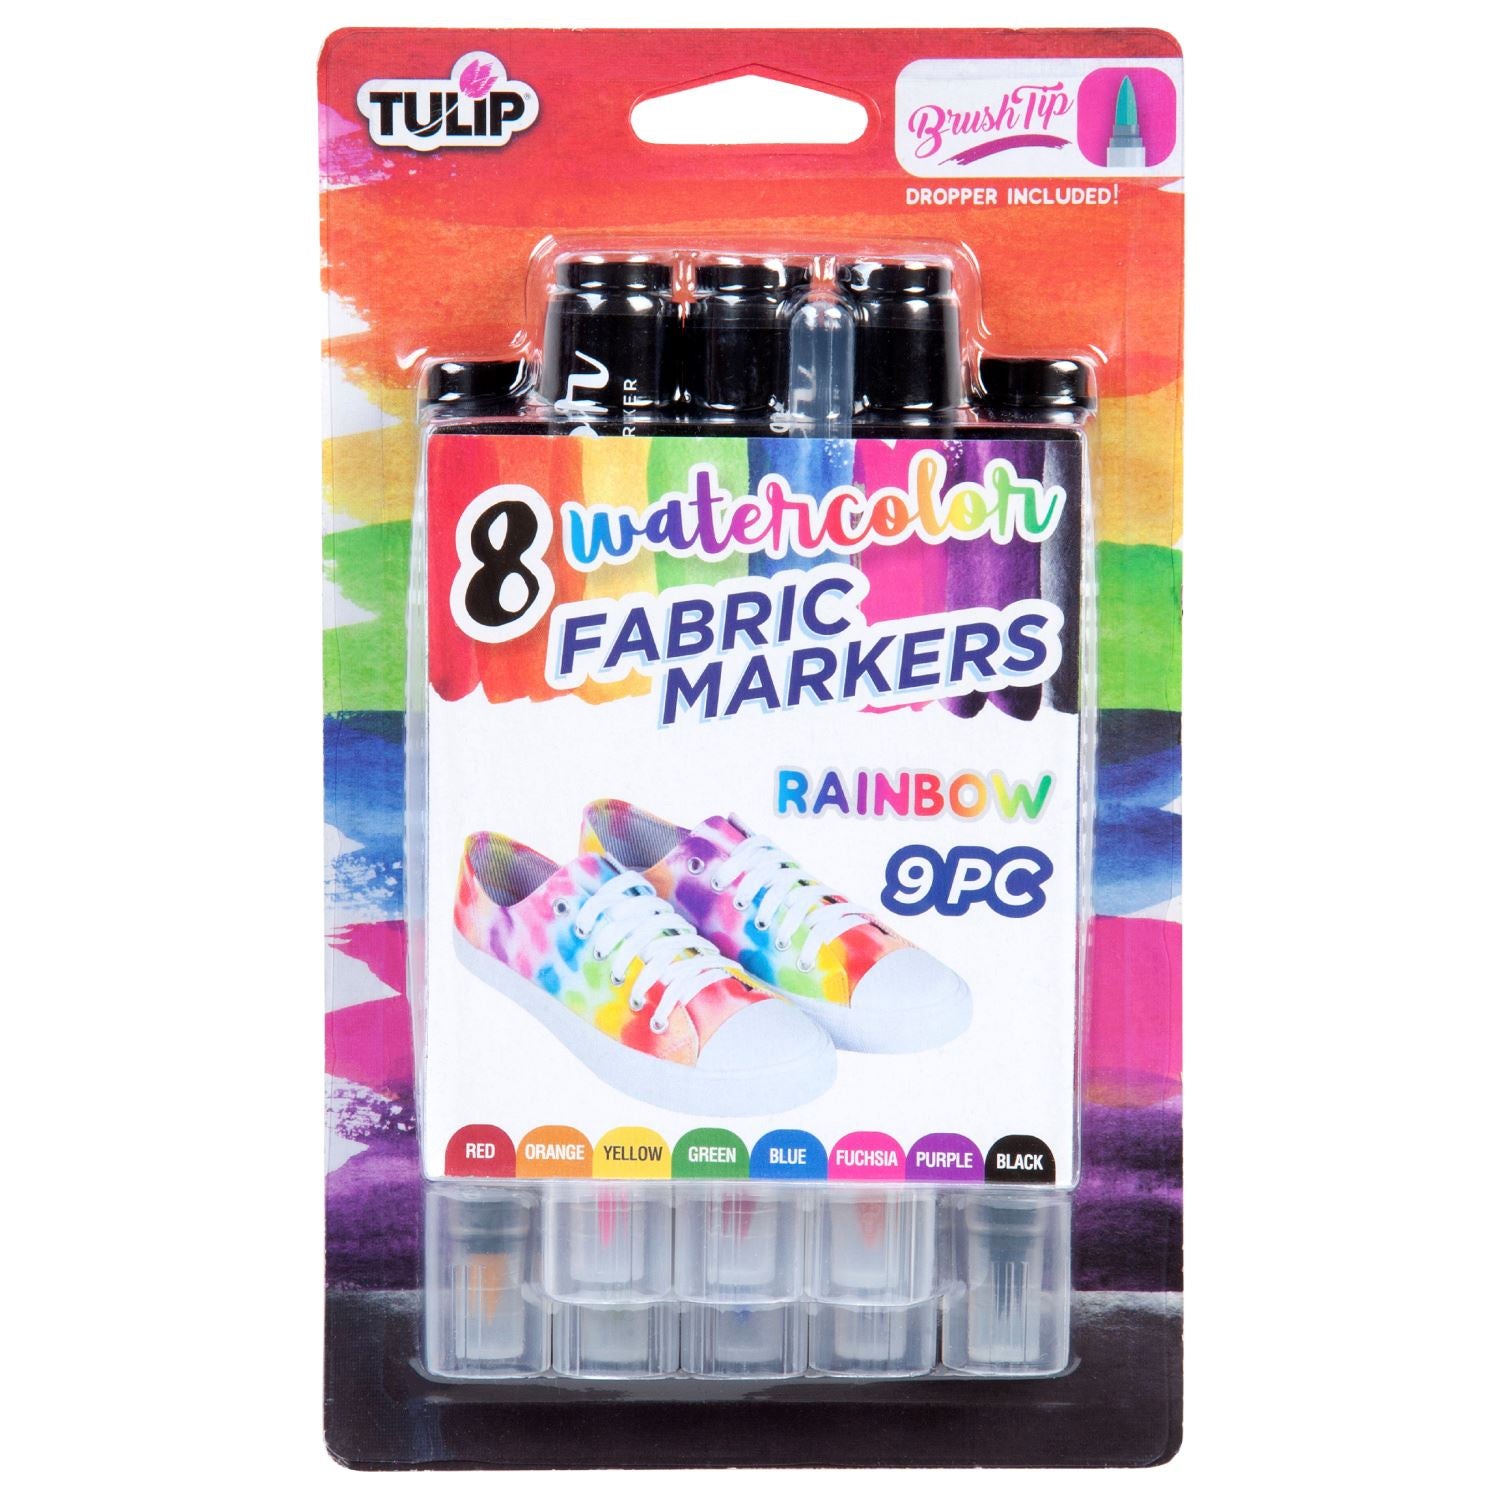 Tulip Watercolor Fabric Markers Rainbow 8 Pack - 1